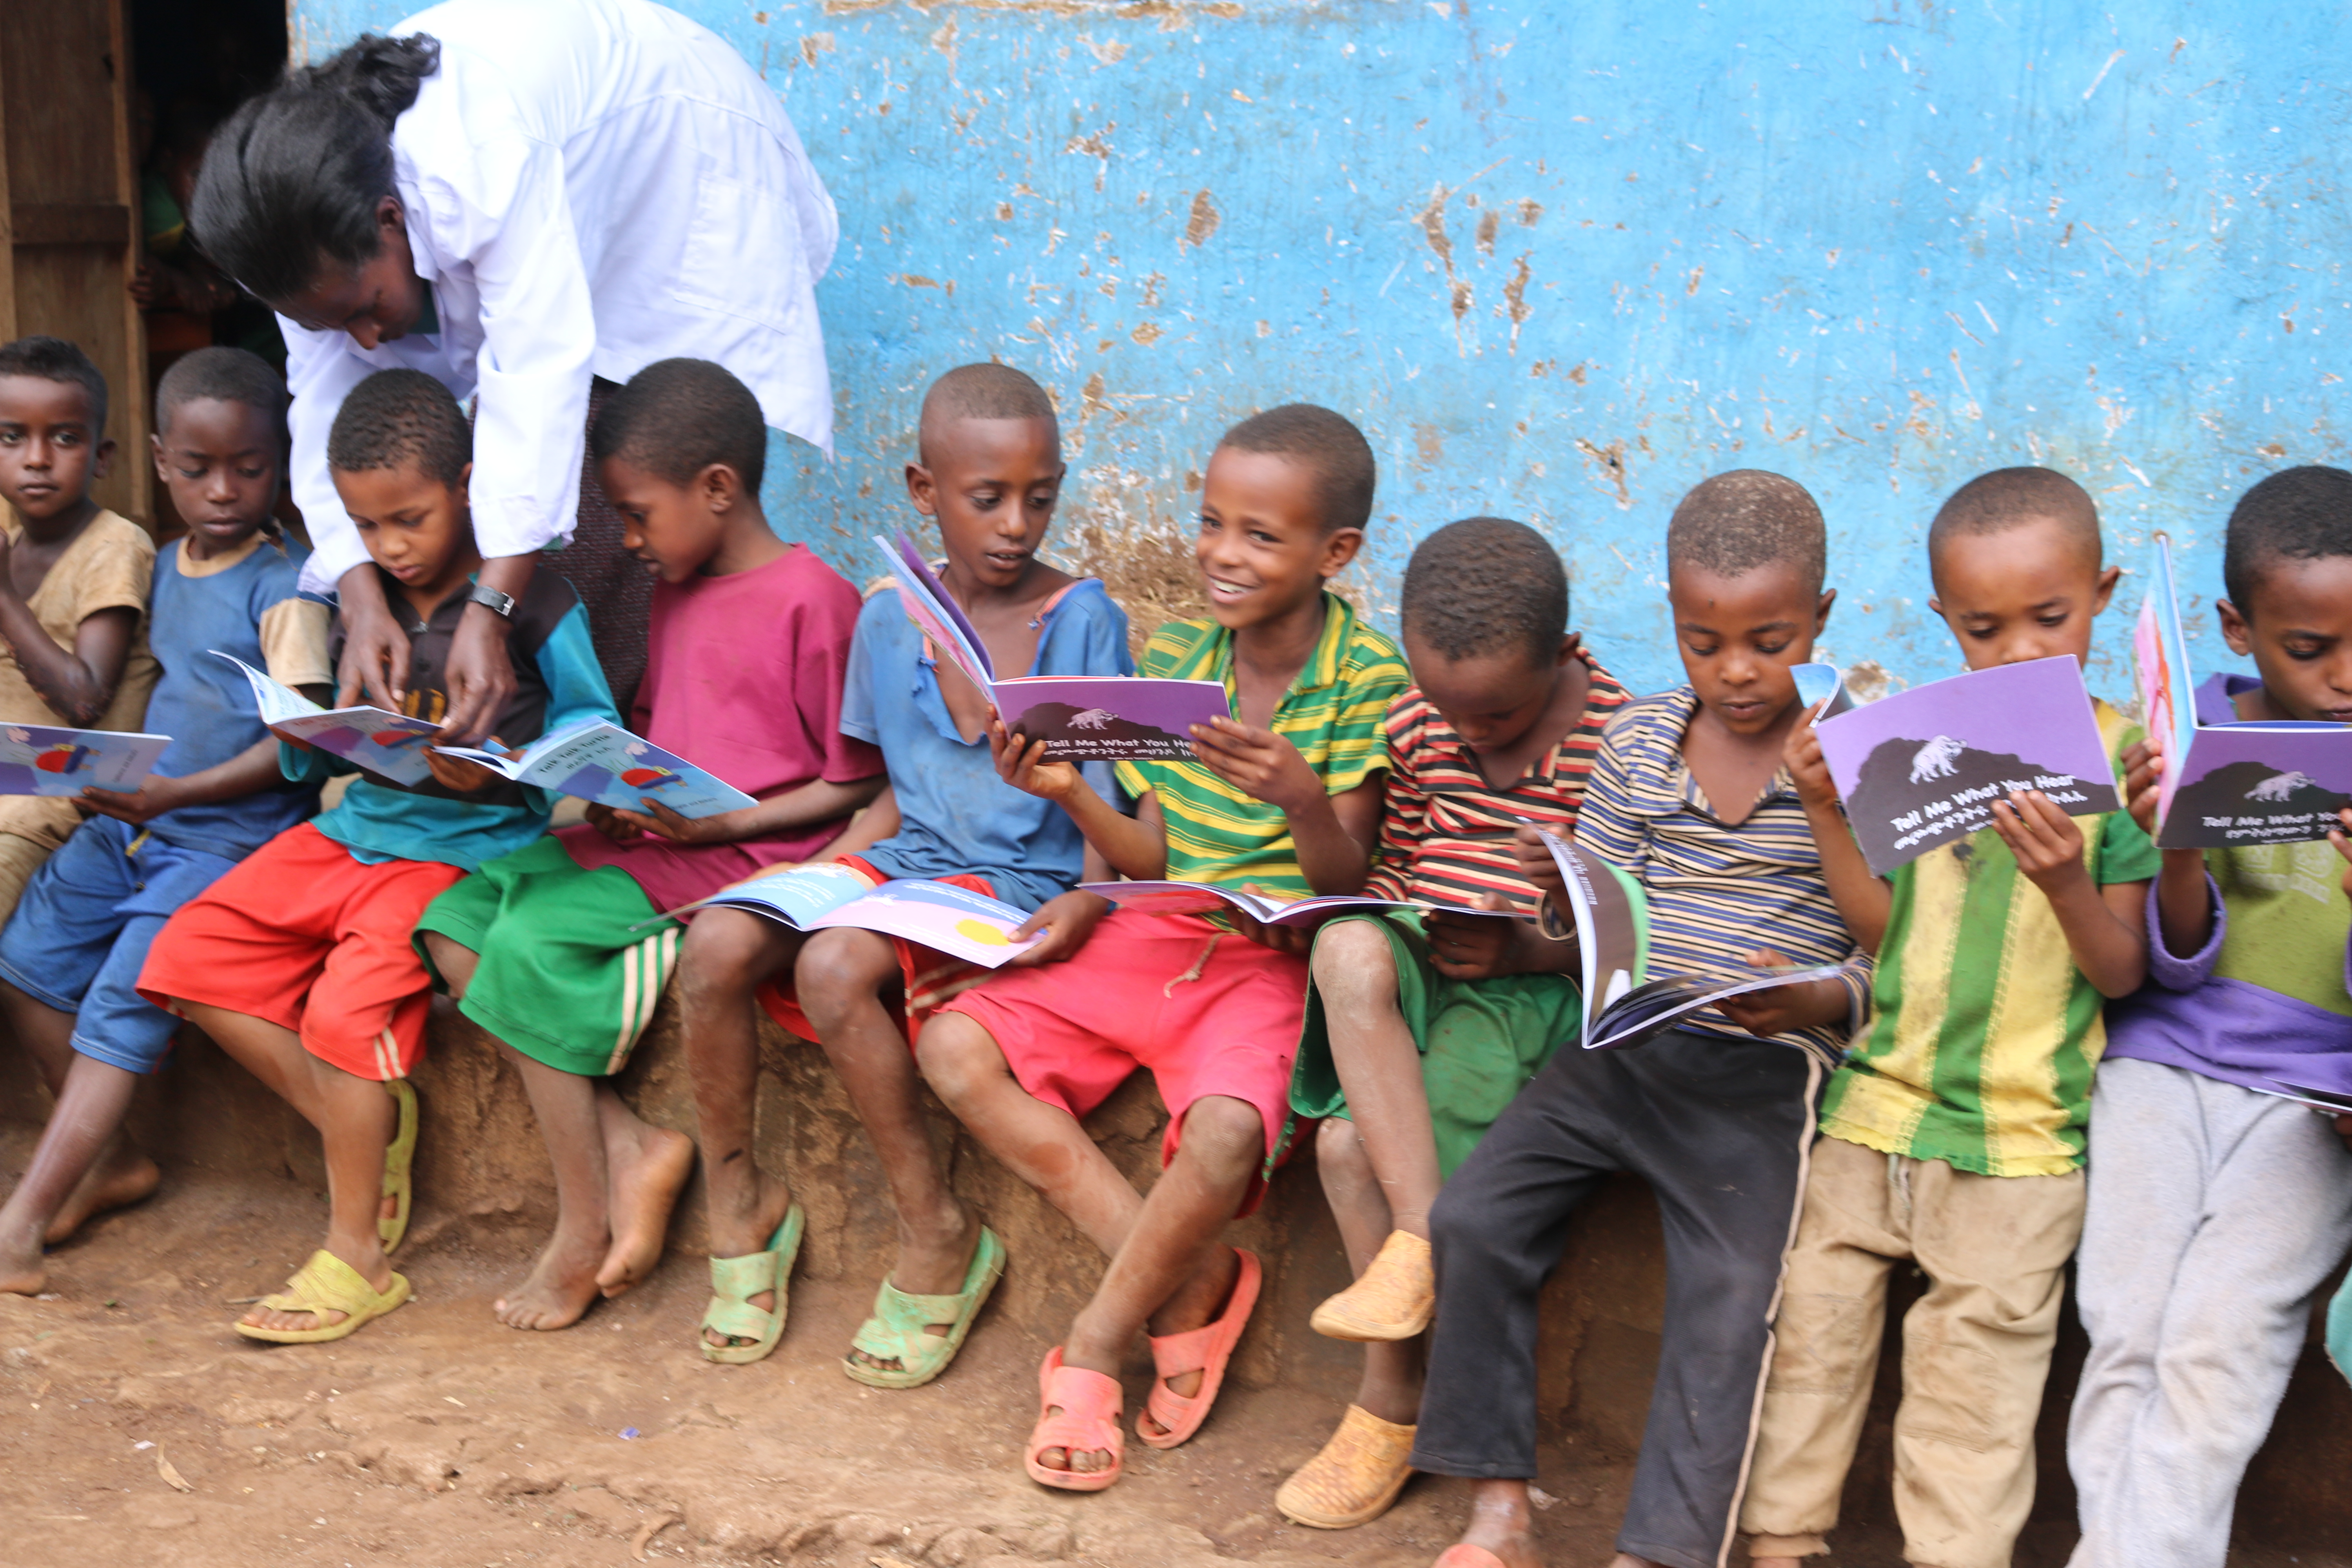 Children sitting outside on a sidewalk in Ethiopia with their science books.